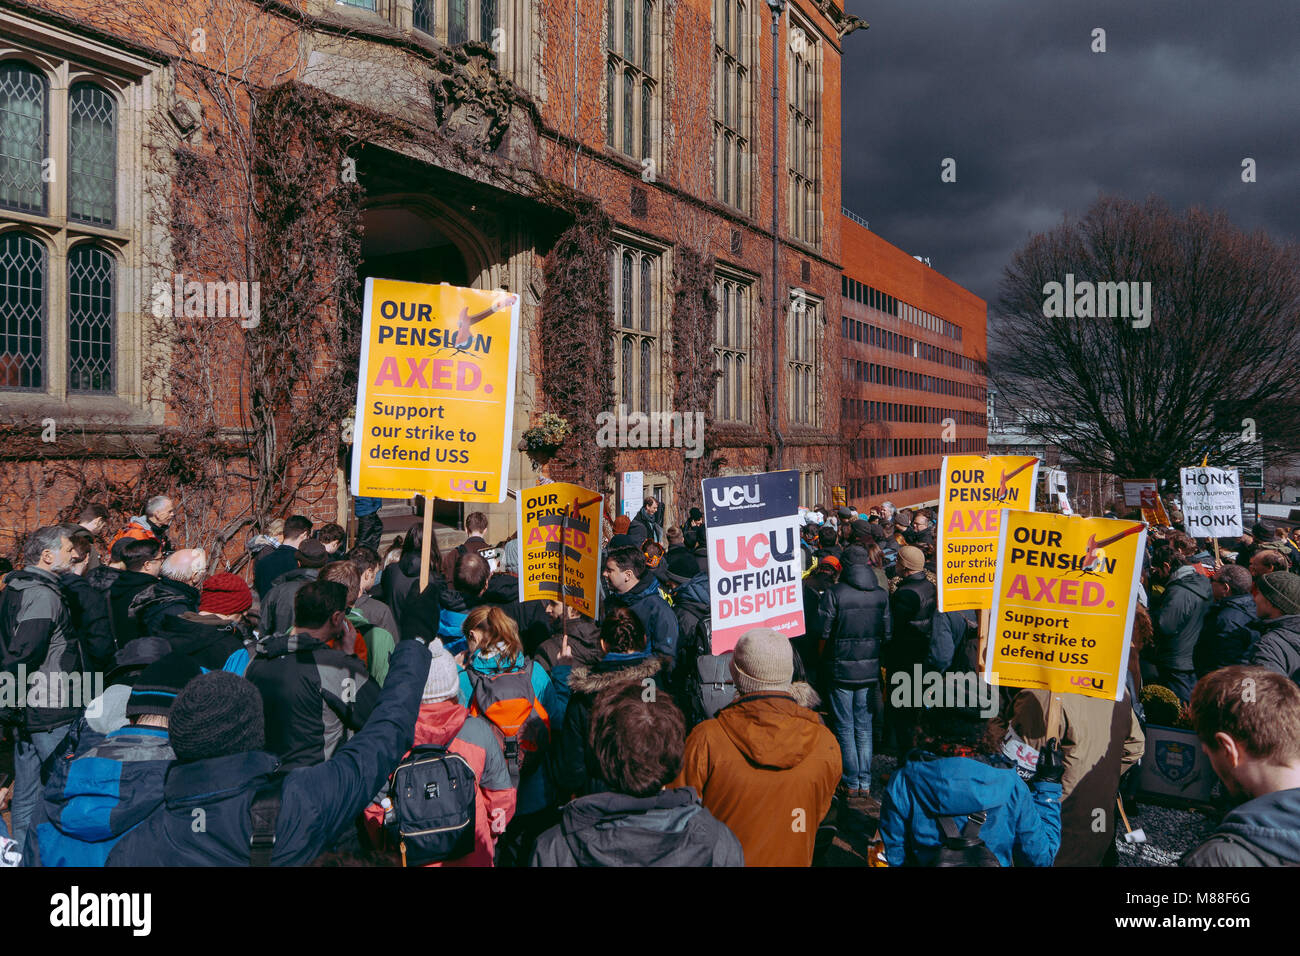 Sheffield, UK. 16th March, 2018. University of Sheffield, UK. Universities and Colleges Union rally at Sheffield University. Rally in front of Firth Court signifying last day of current planned strikes in relation to ongoing dispute over further education pensions. Credit: Ashley Mayes/Alamy Live News Stock Photo